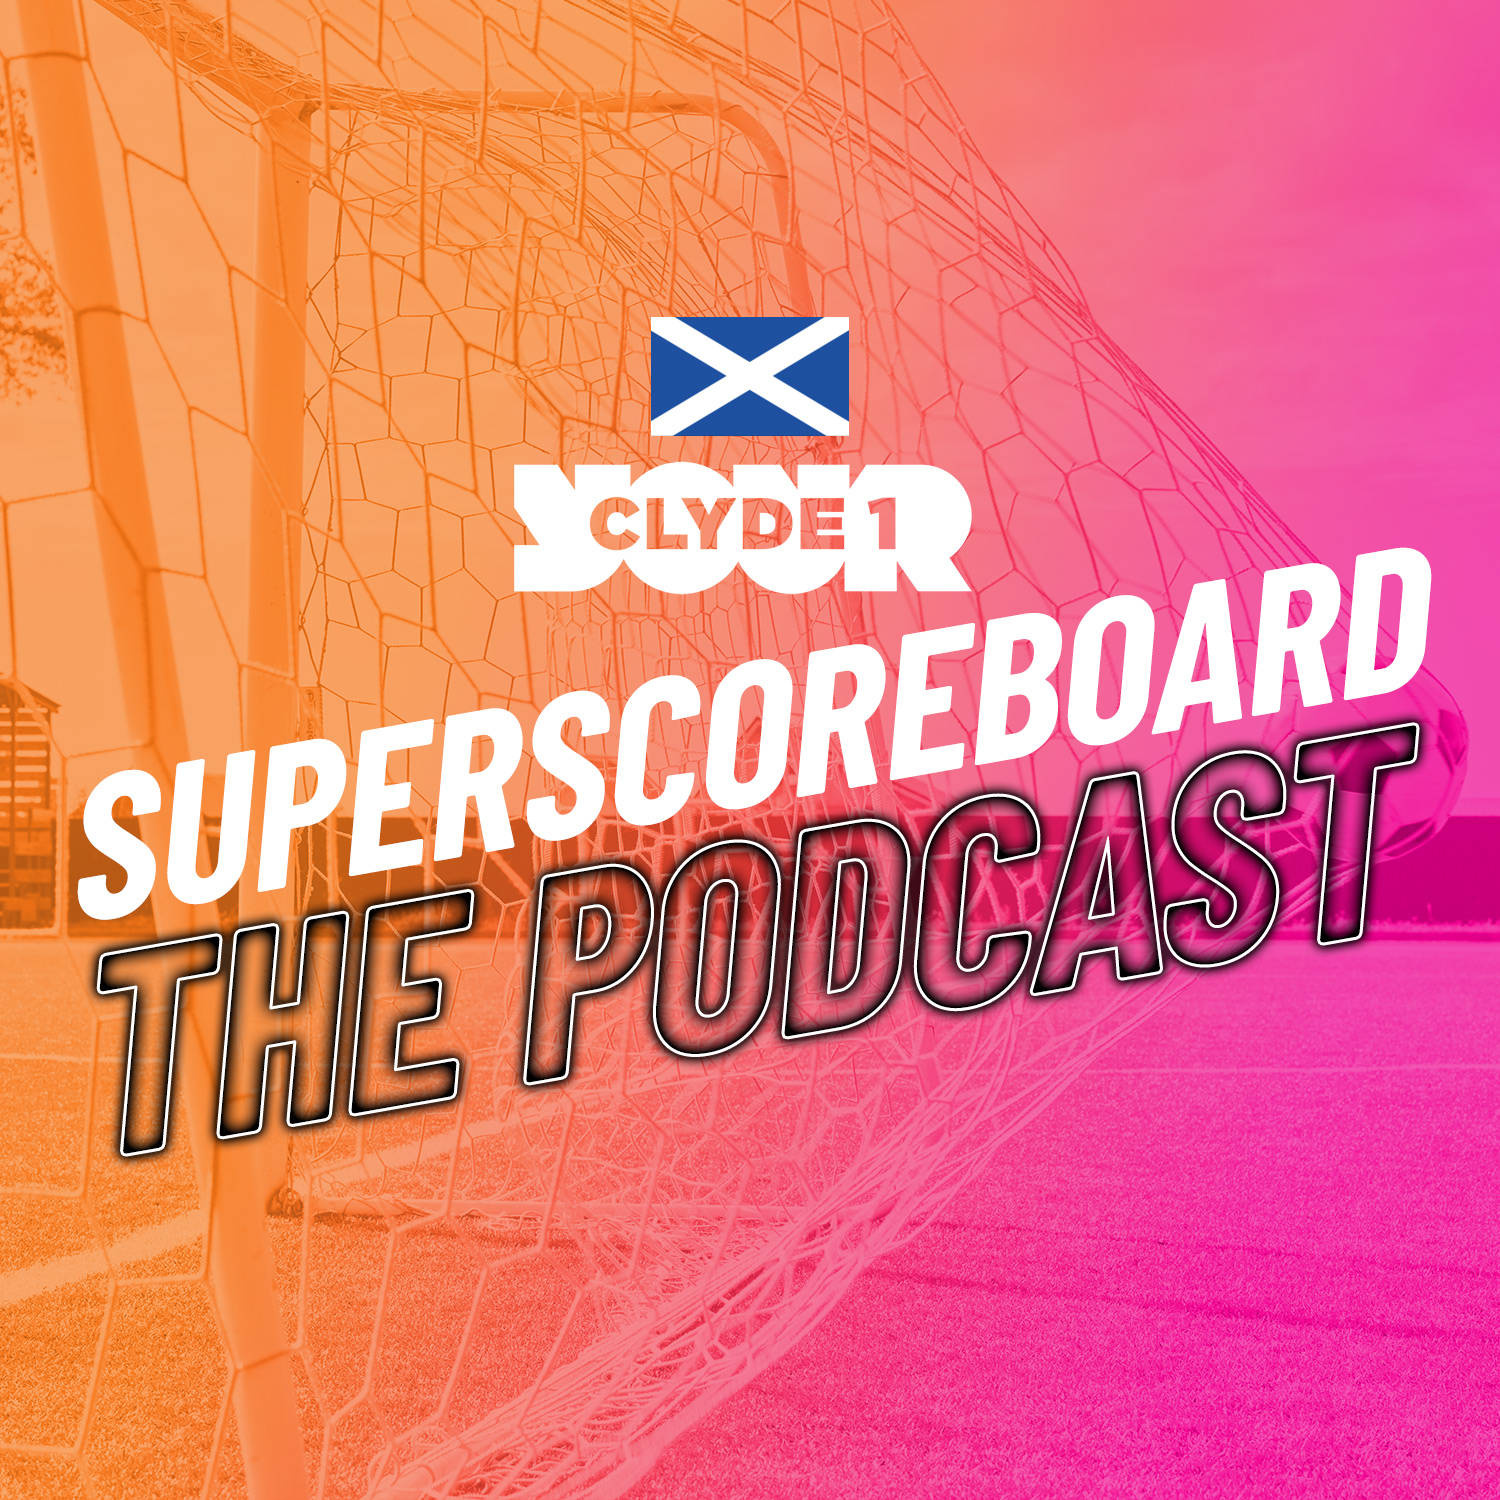 Friday 5th April Clyde 1 Superscoreboard